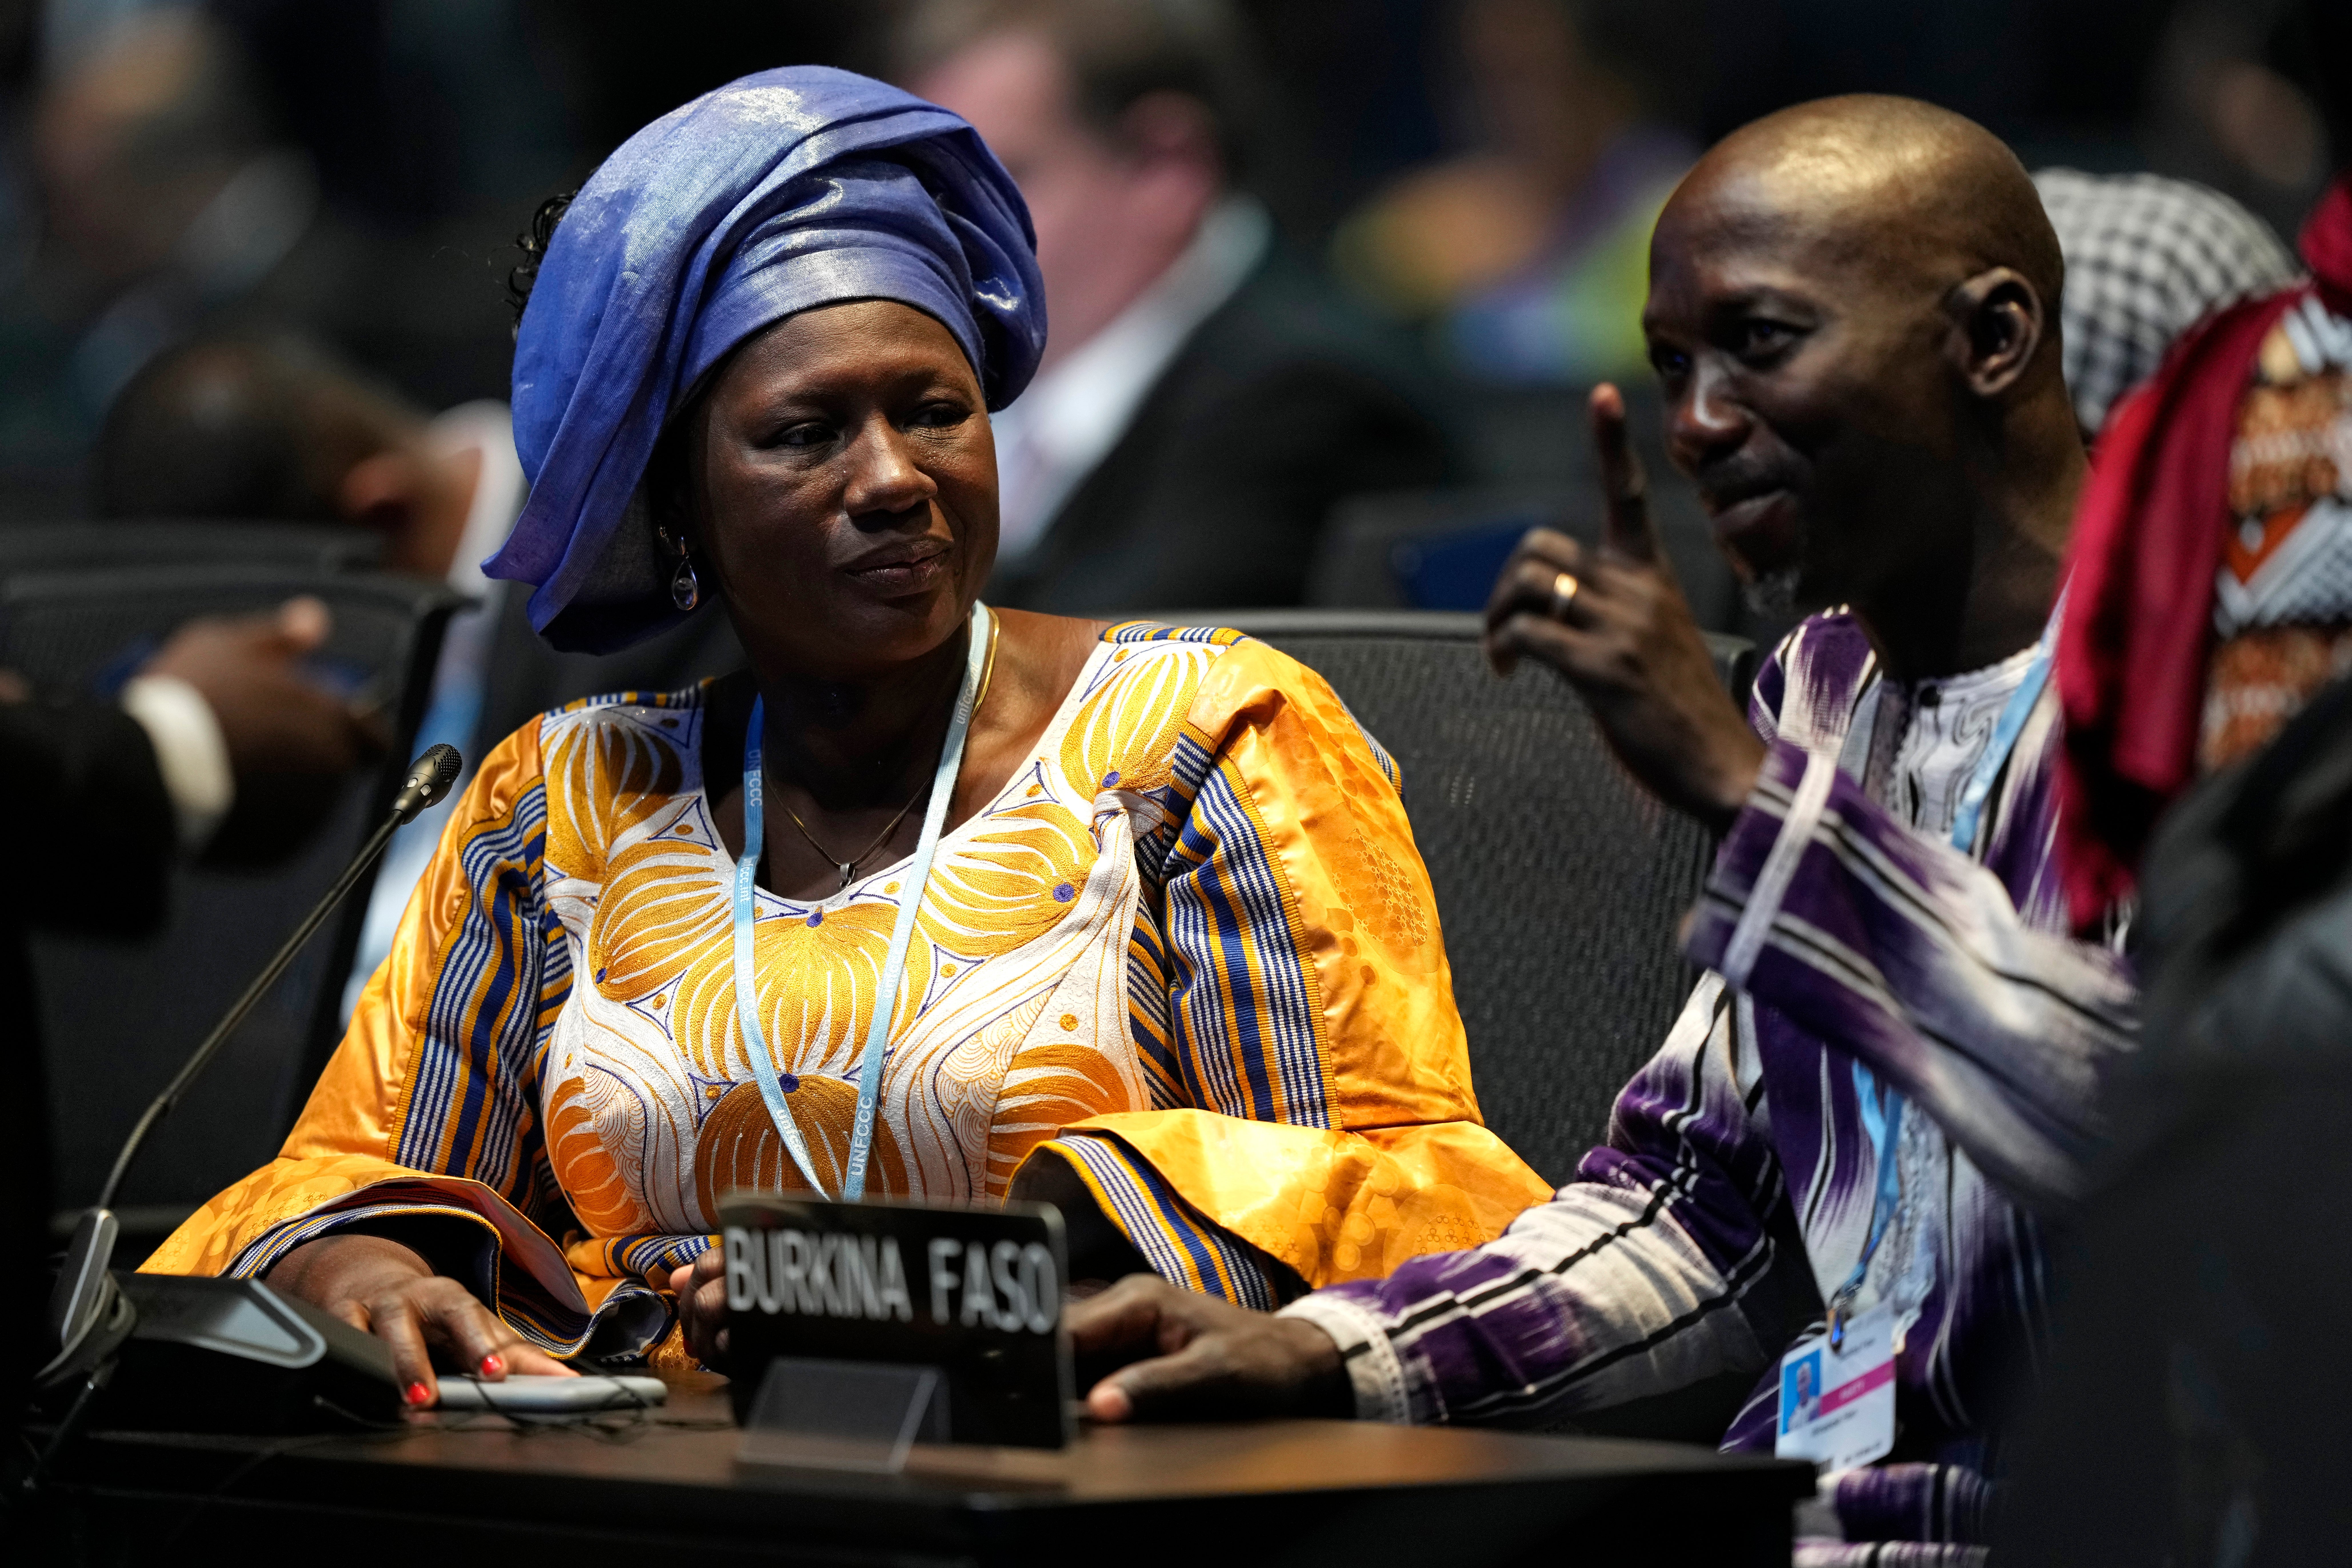 Delegates from Burkina Faso attend an opening session at Cop27